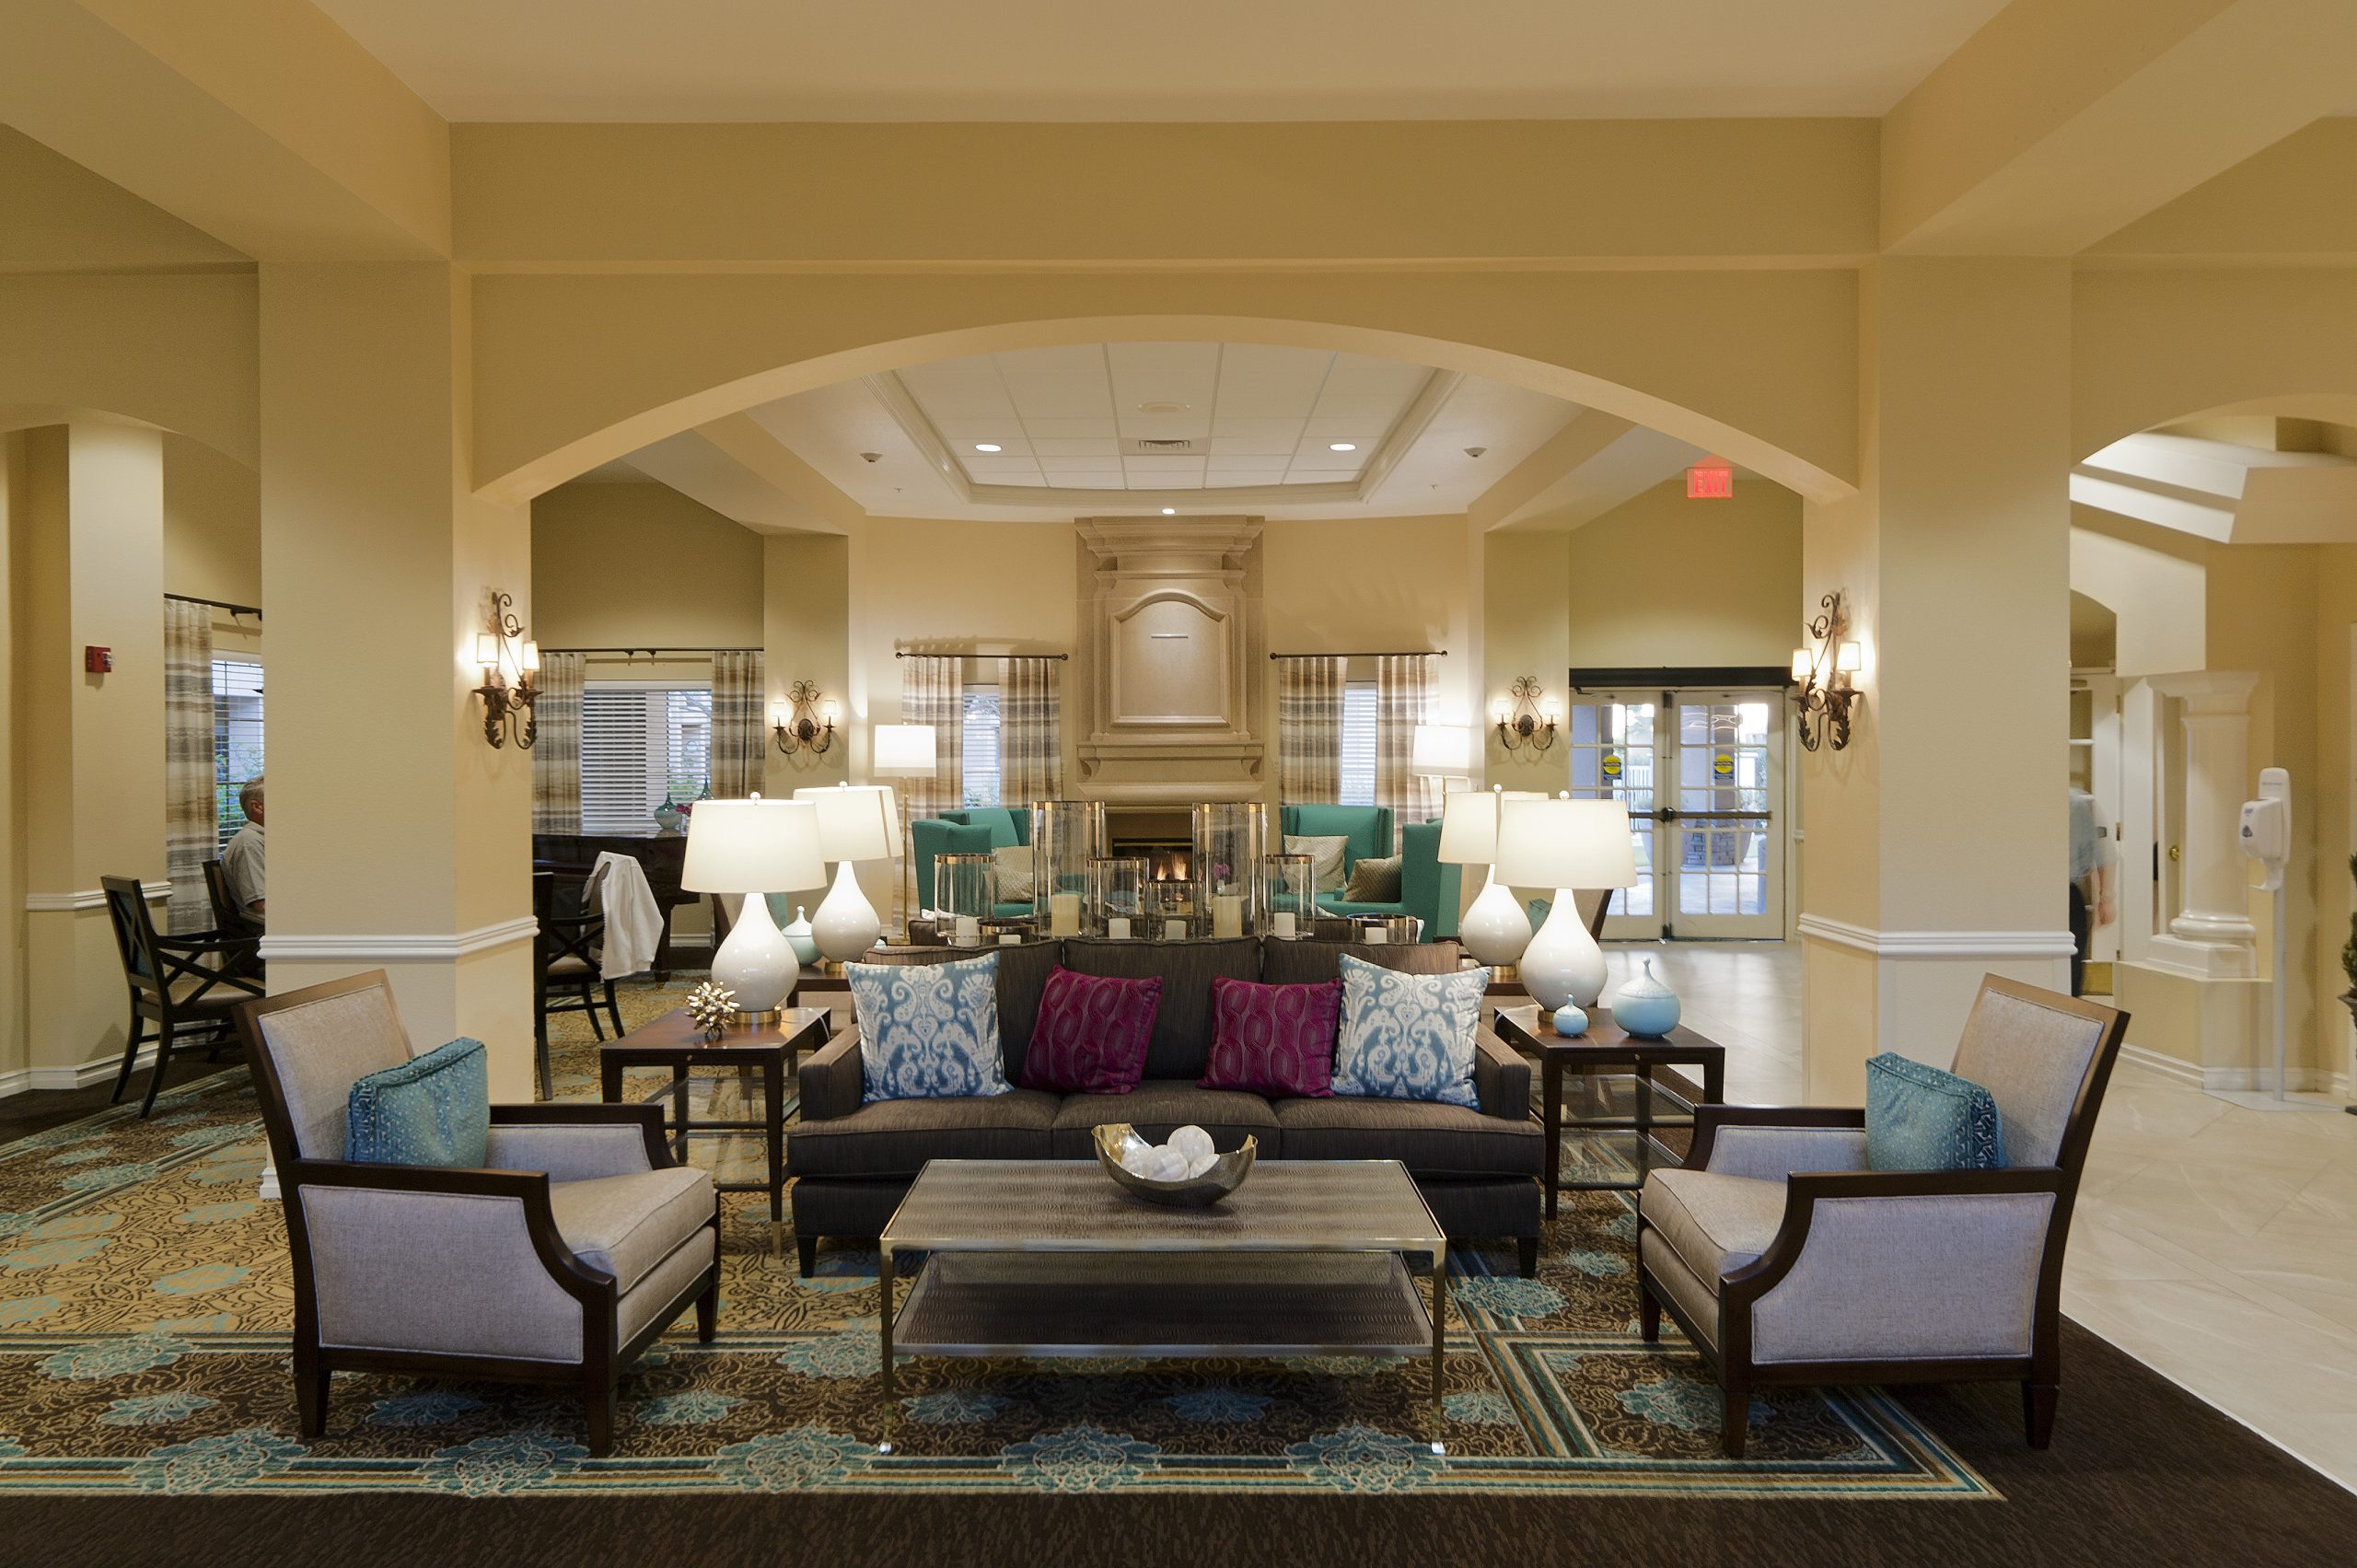 A lobby with a grand fireplace, creating a warm and inviting atmosphere for guests.